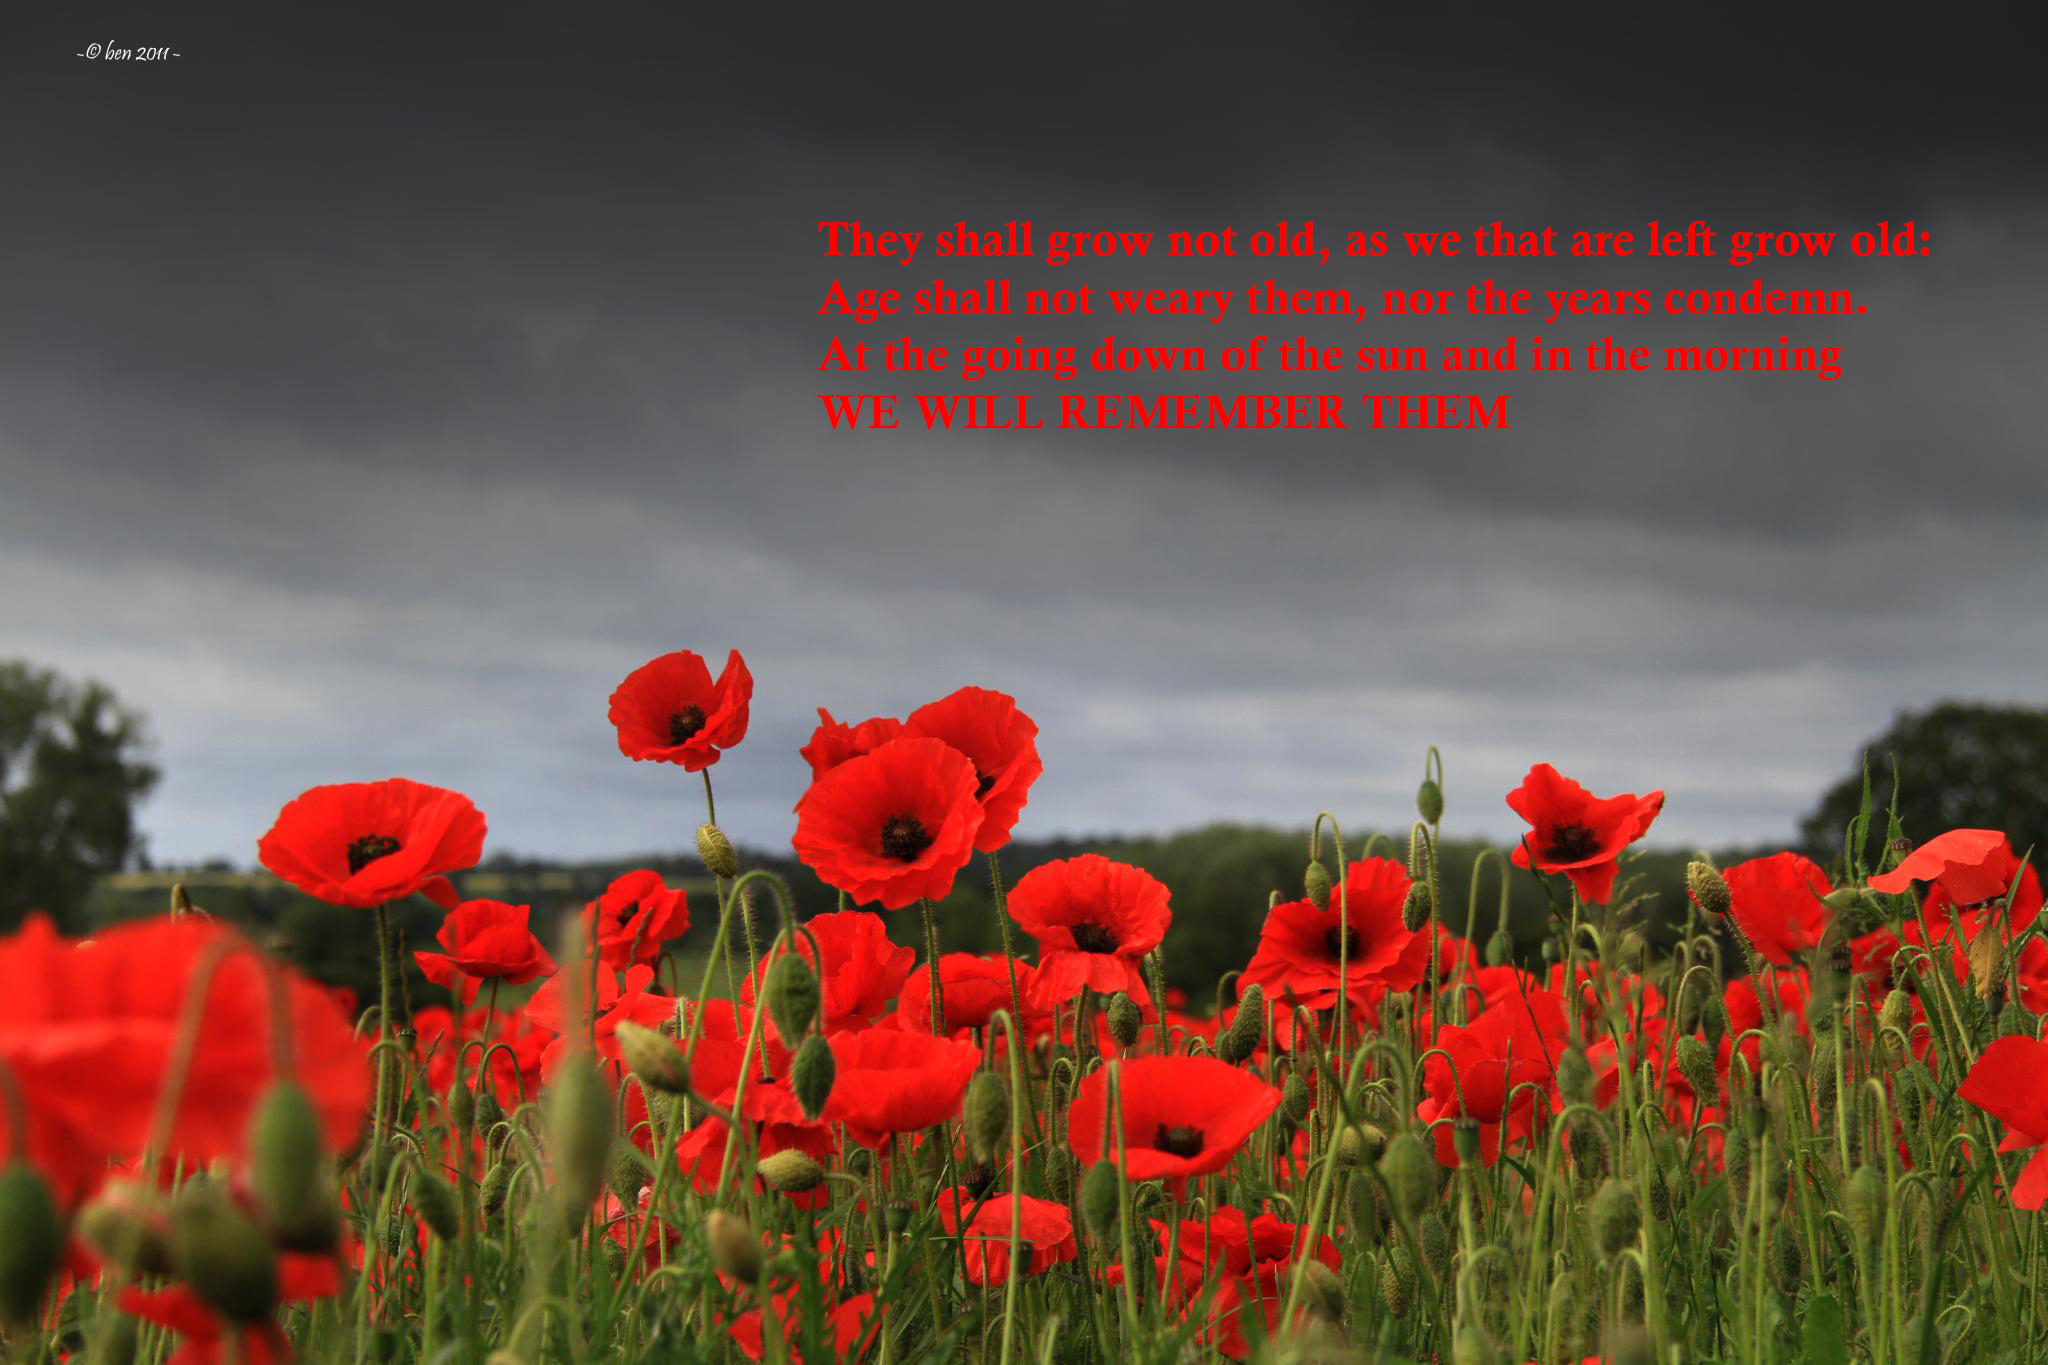 copyright: http://www.beyondthepoint.co.uk/property/remembrance-day/